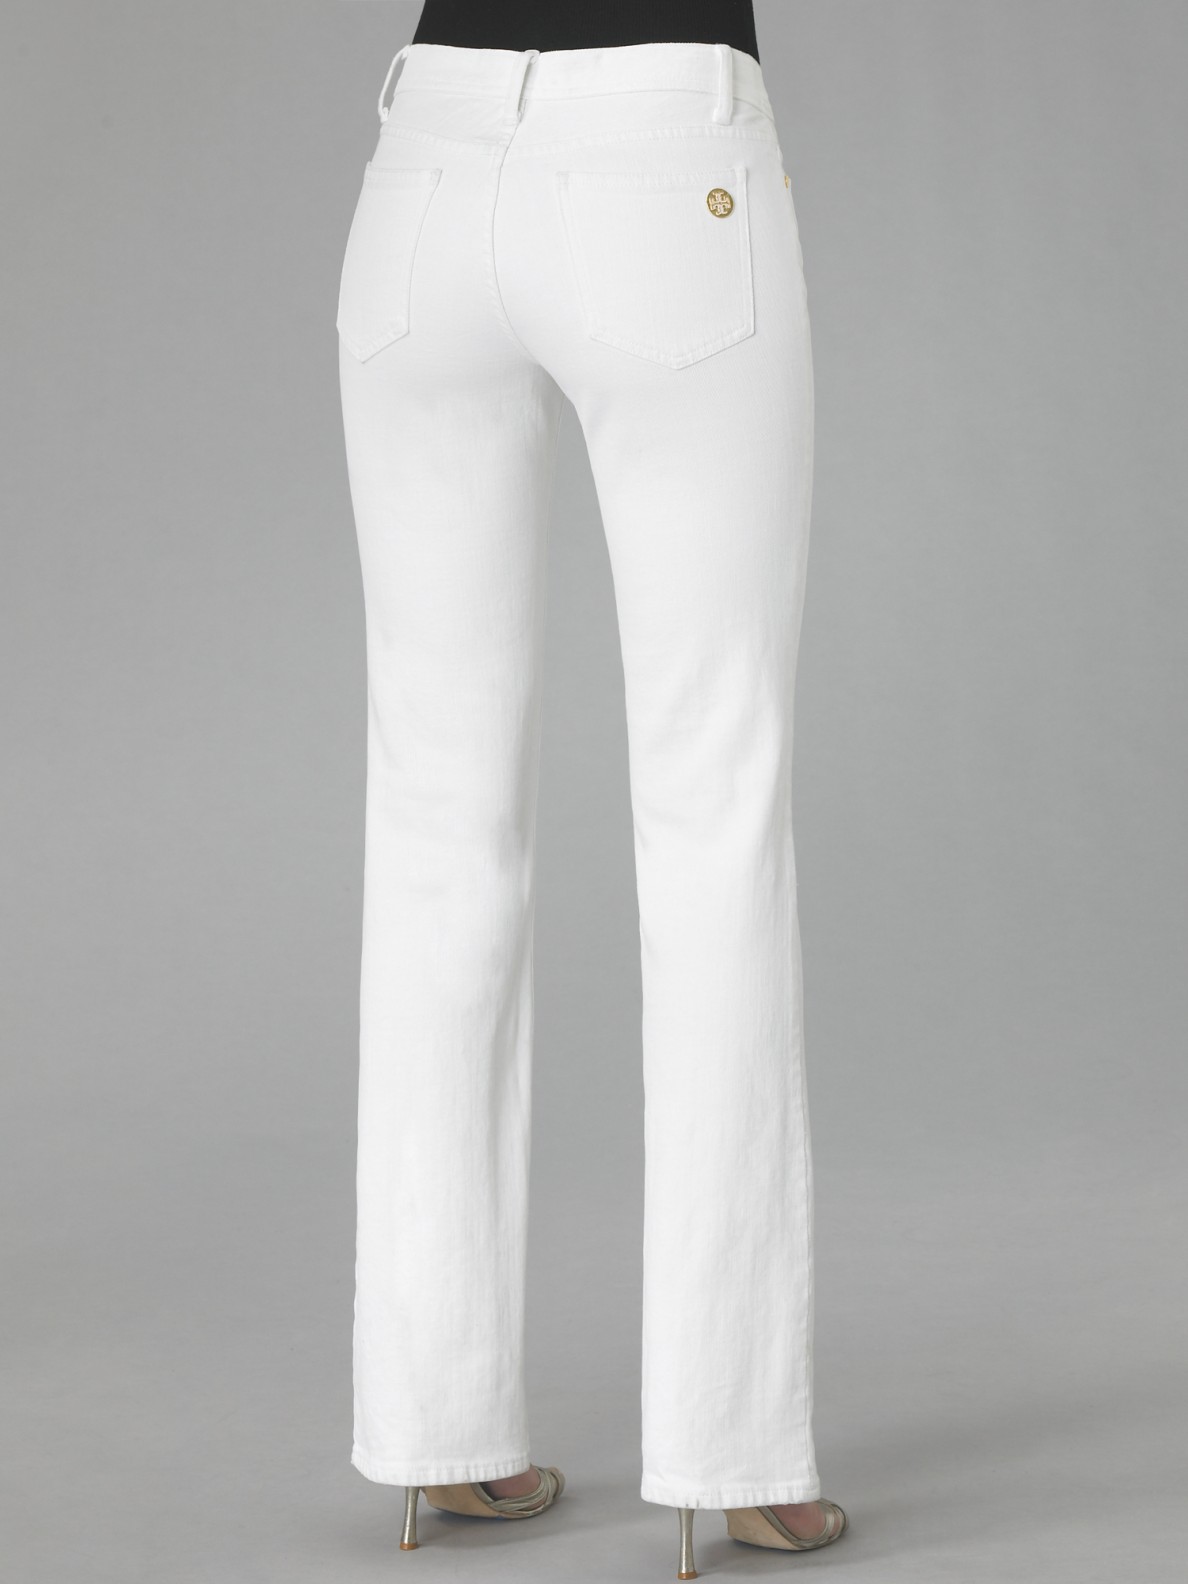 Tory Burch Tory Classic Jeans in White | Lyst